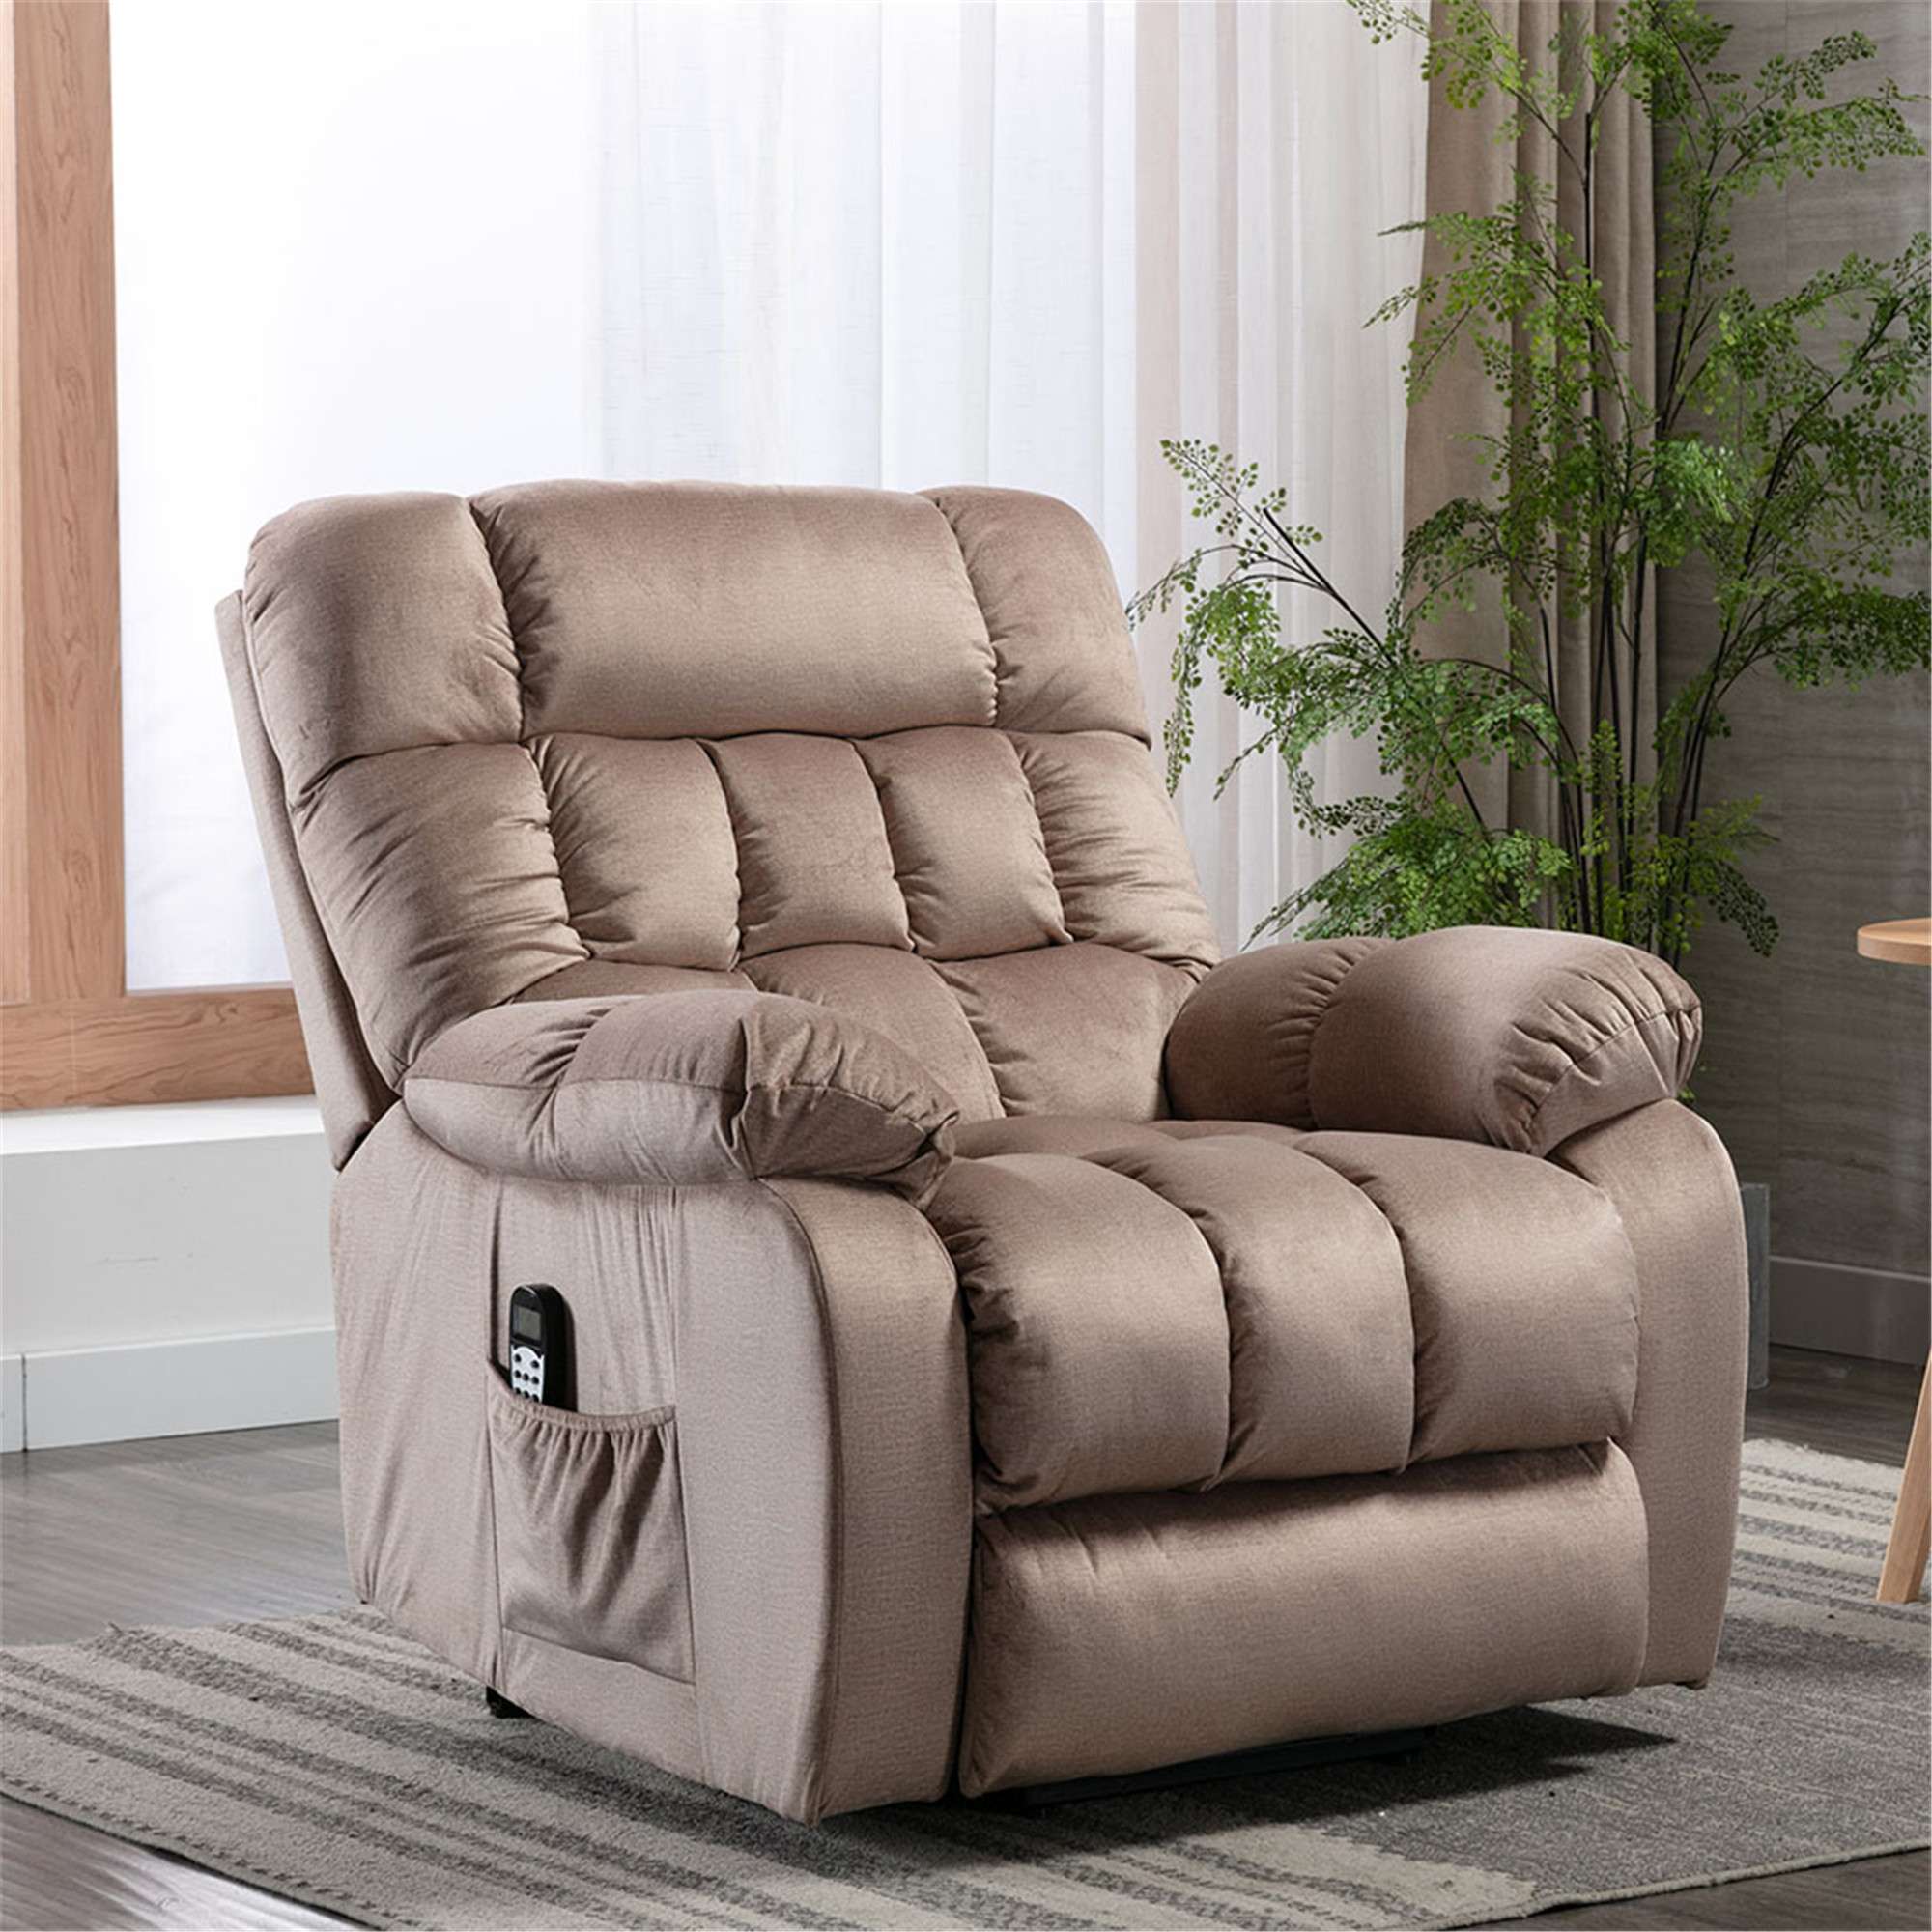 Irene Inevent Electric Lift Recliner Heated Massage Chair ...